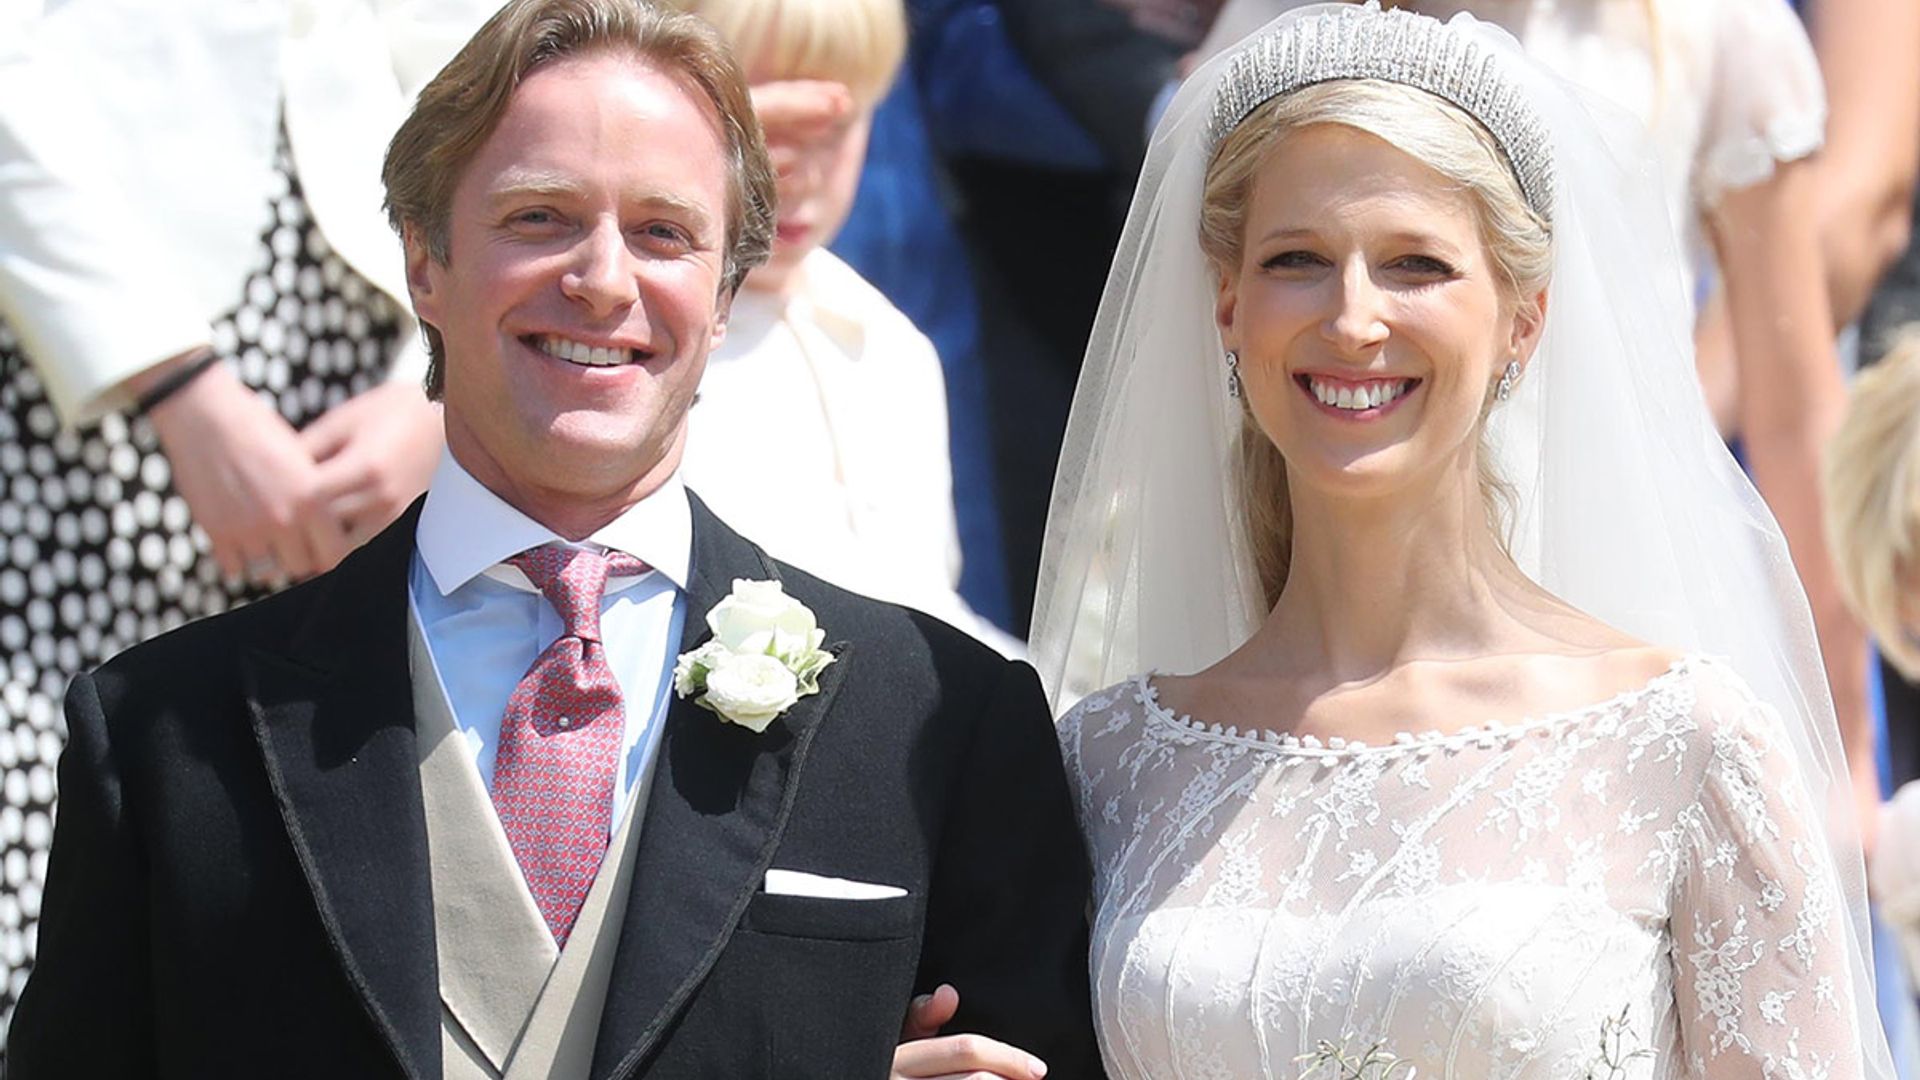 Lady Gabriella Windsor's wedding cake recipe from her baker Fiona Cairns